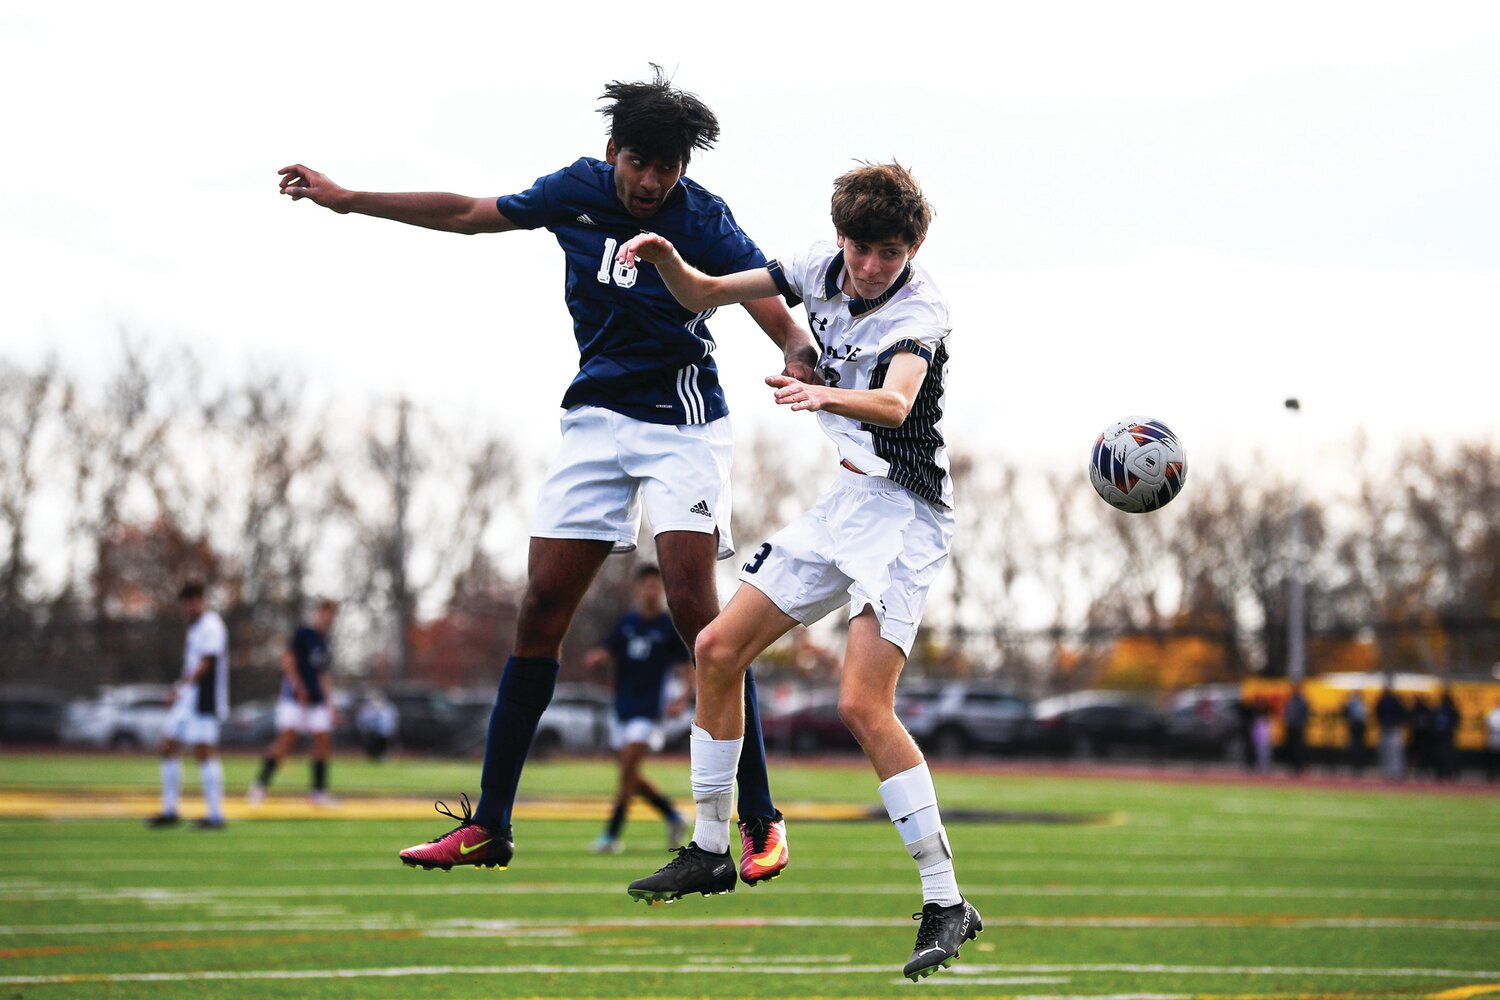 Council Rock North’s Keertan Palayam and La Salle’s Liam Pottichen battle for a corner kick pass in front of the La Salle goal during Saturday’s PIAA quarterfinal contest.